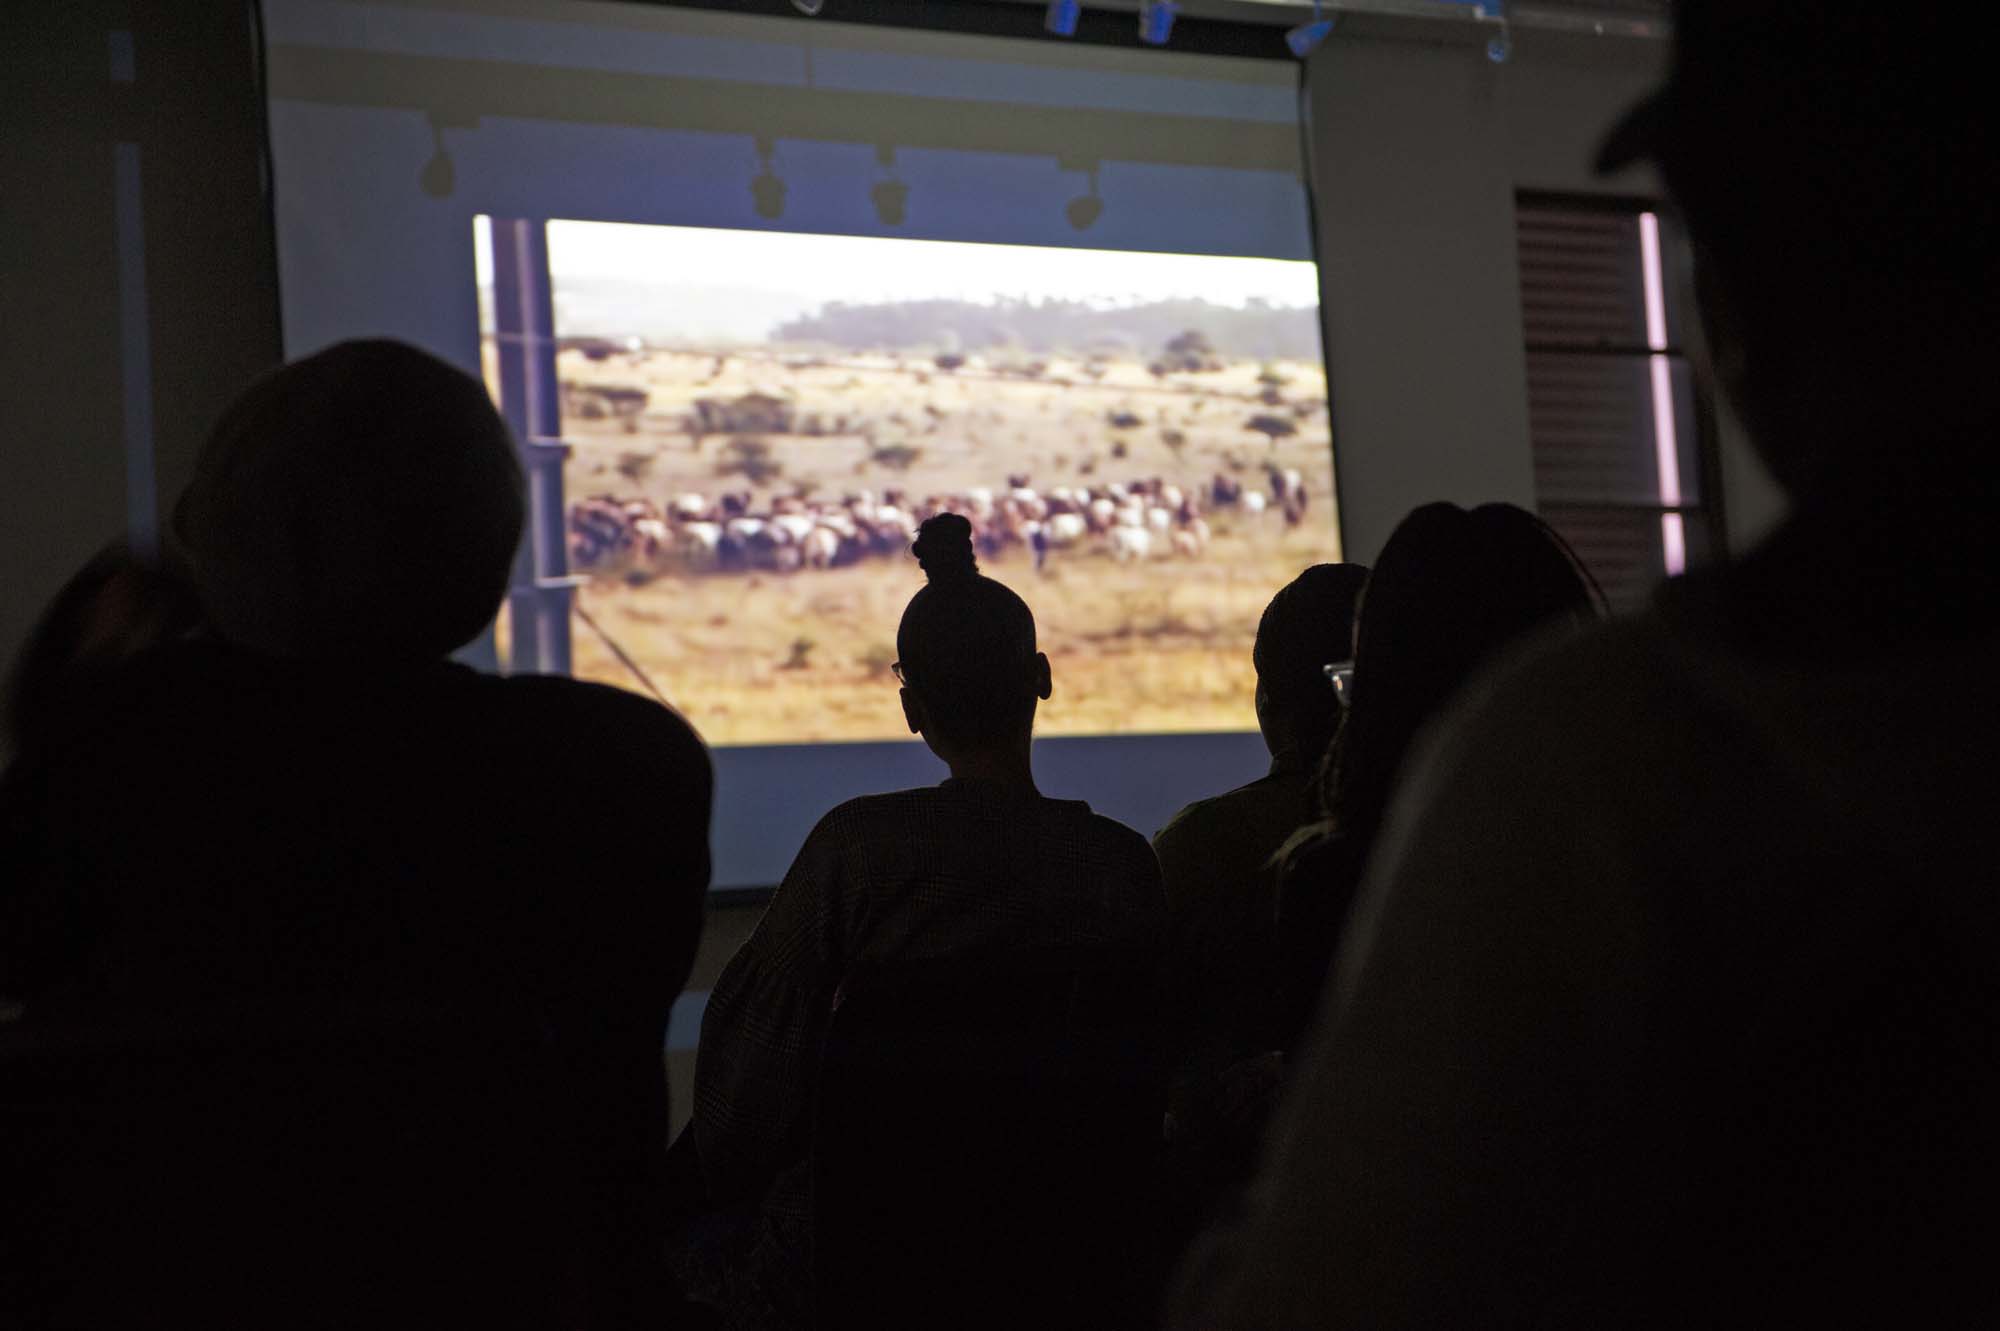 CAS Gallery hosted week-long events, which included a film screening of “Miners shot down” Commemorating the 10th year since the Marikana massacre. Photo Lerato Maduna.